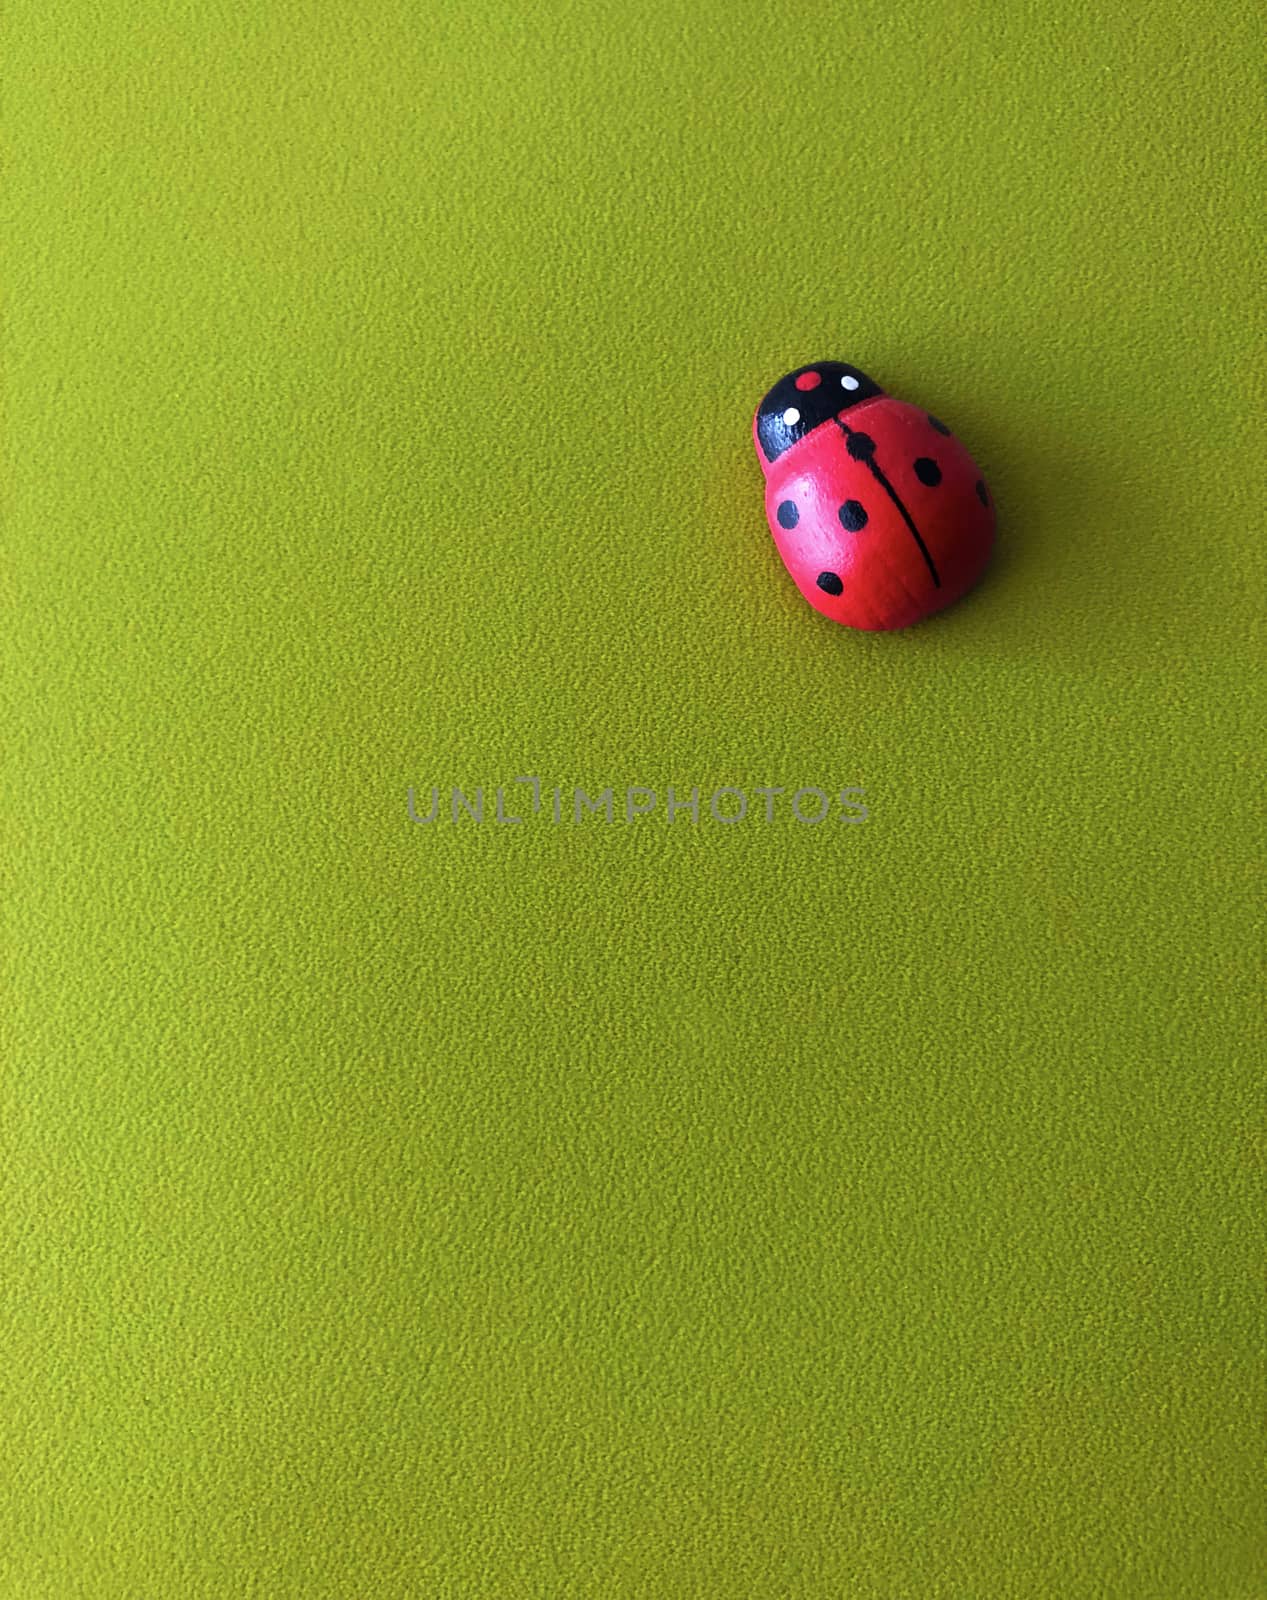 Ladybird spring fresh luck concept isolated on green background in vivid colors 